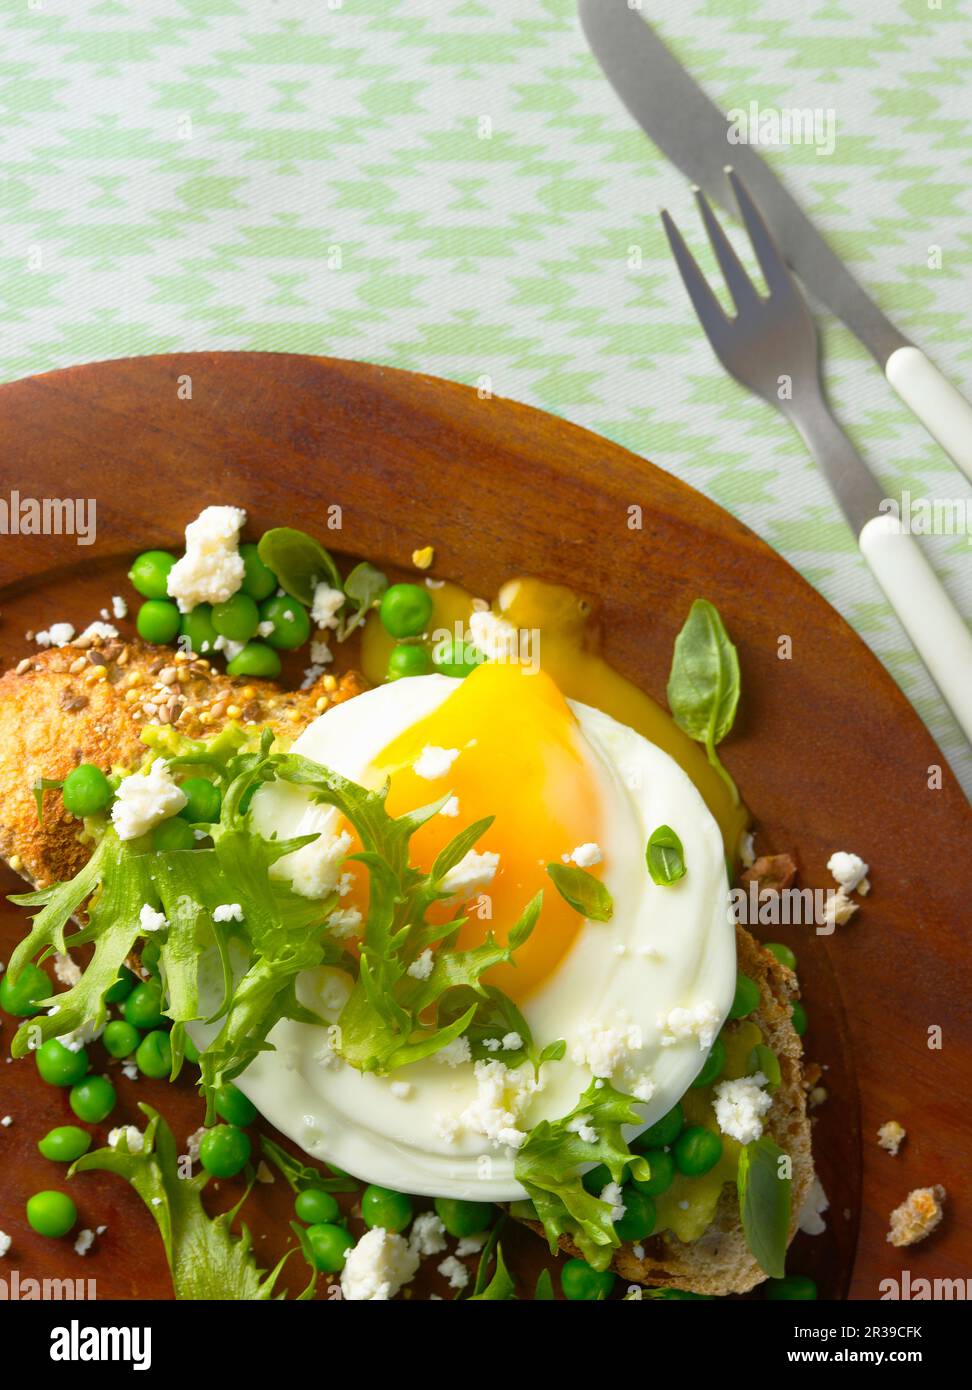 A fried egg on a slice of bread with peas, frisee salad and feta cheese Stock Photo